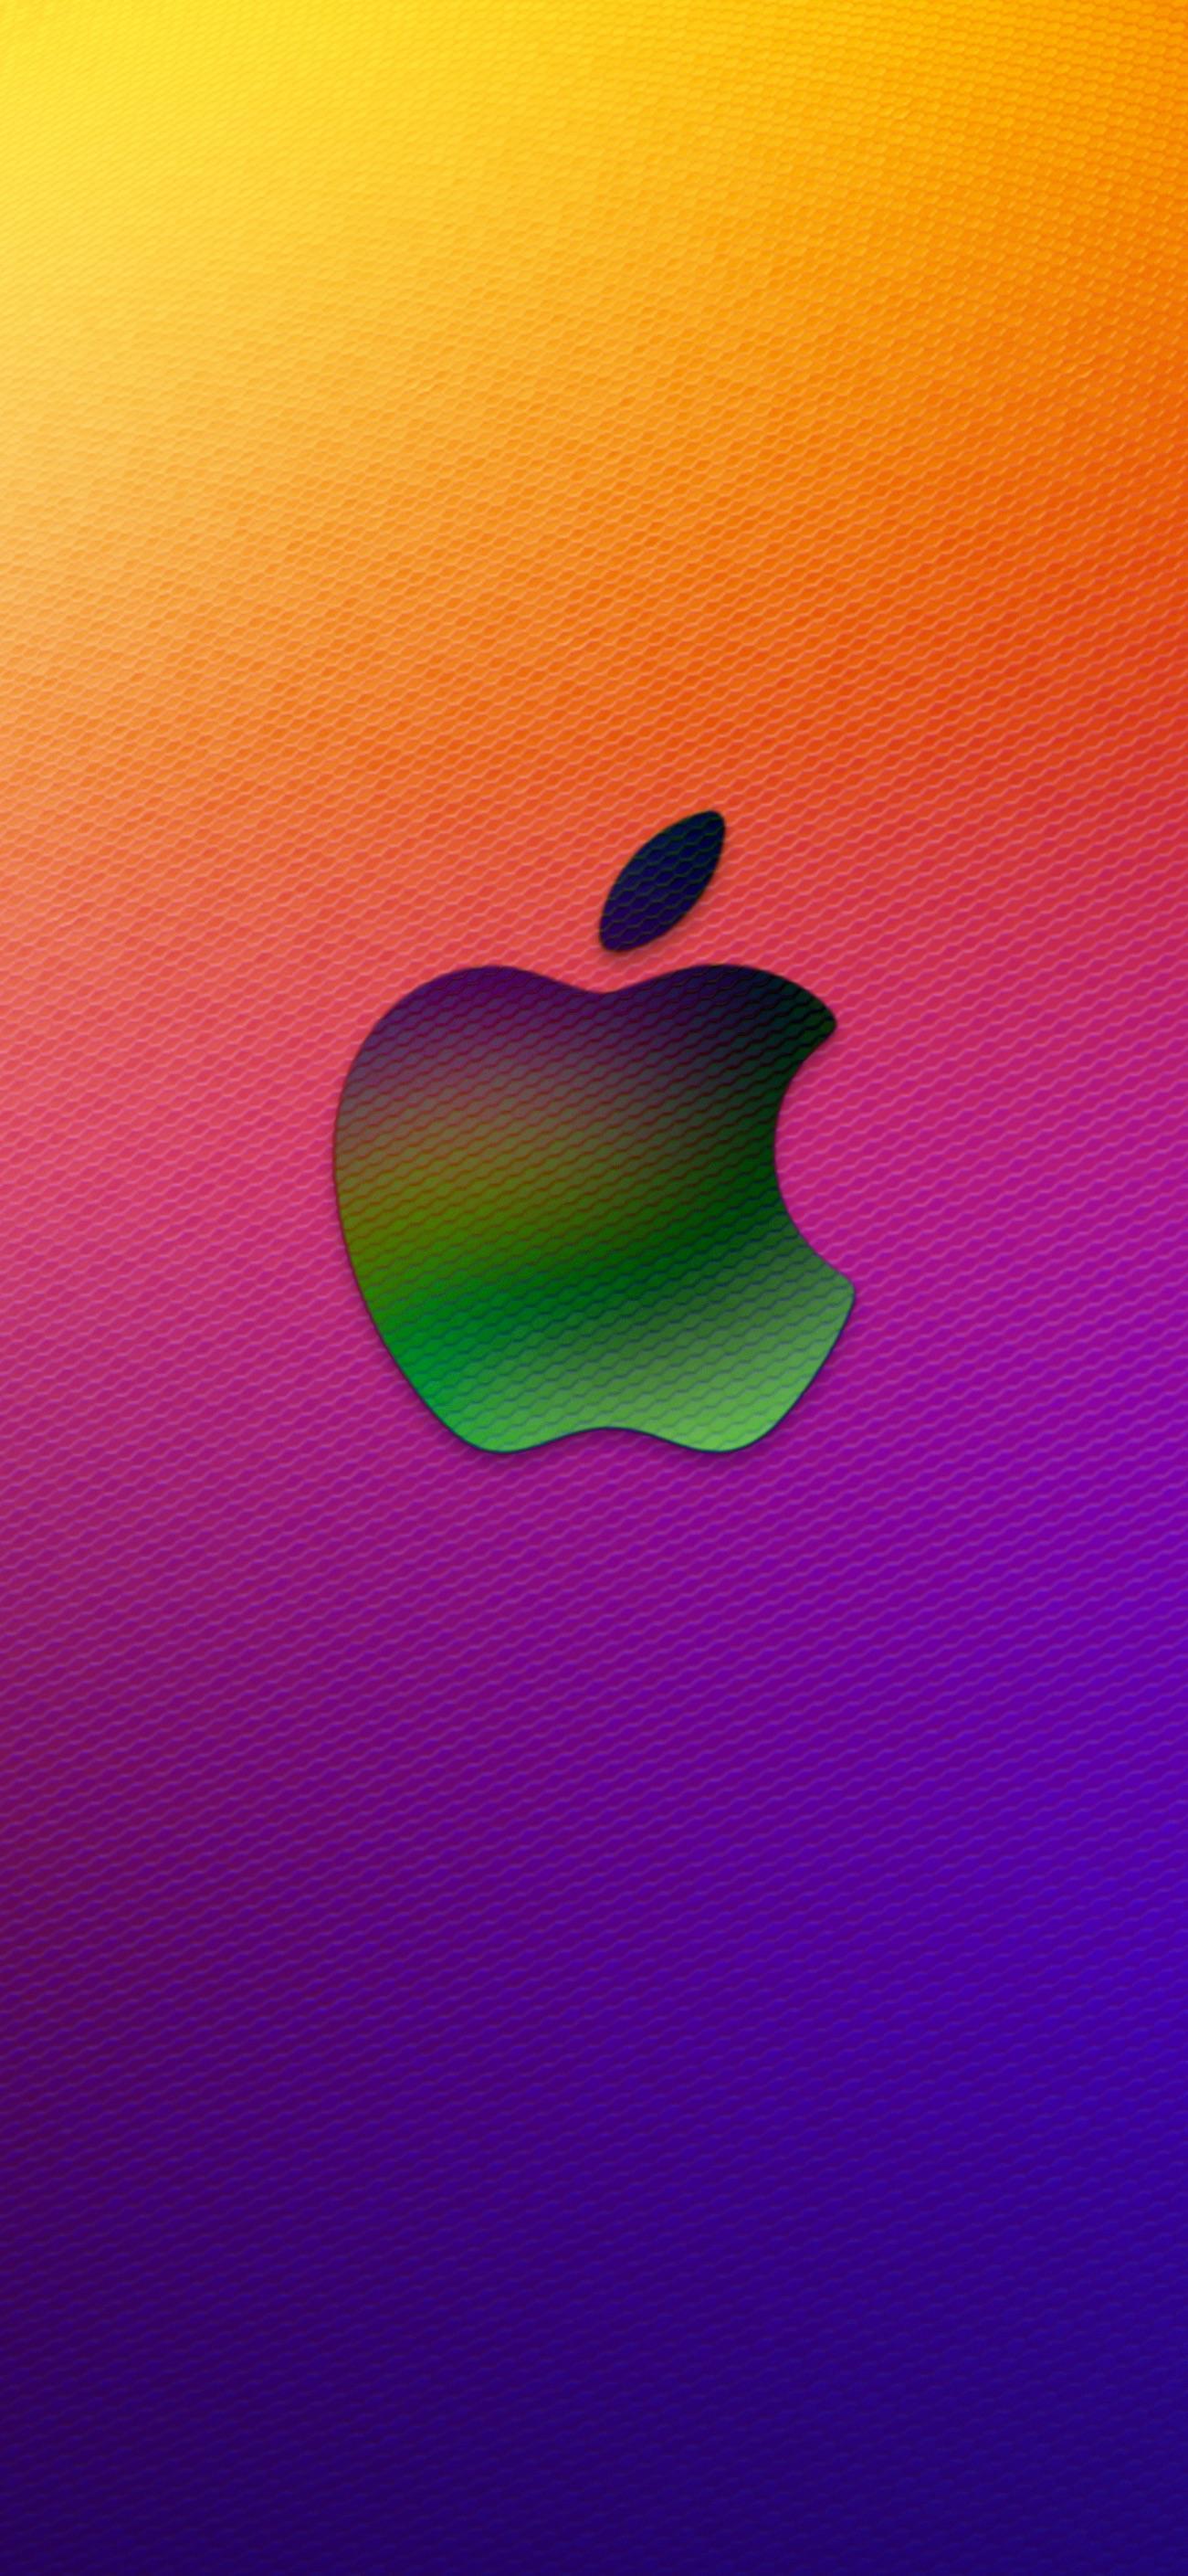 Colorful Apple Logo - iPhoneX] Colorful Apple Logo : iphonexwallpapers